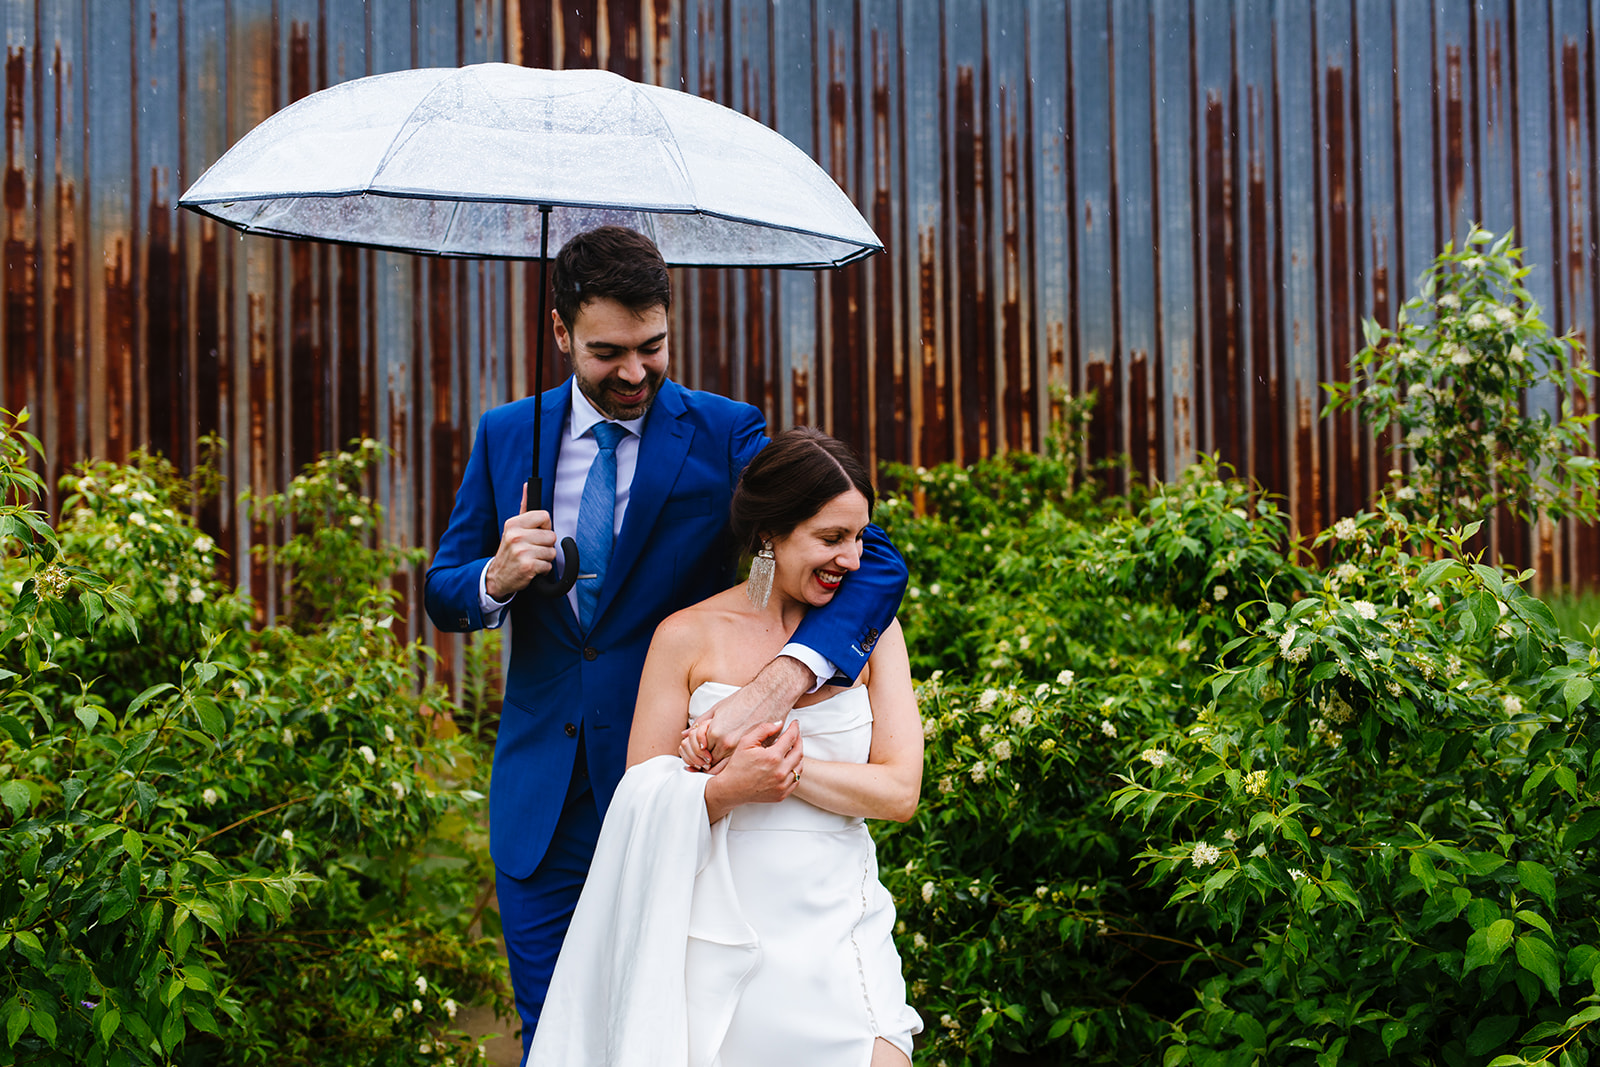 Bride and groom pose under an umbrella during their rainy wedding day at Greylock Works